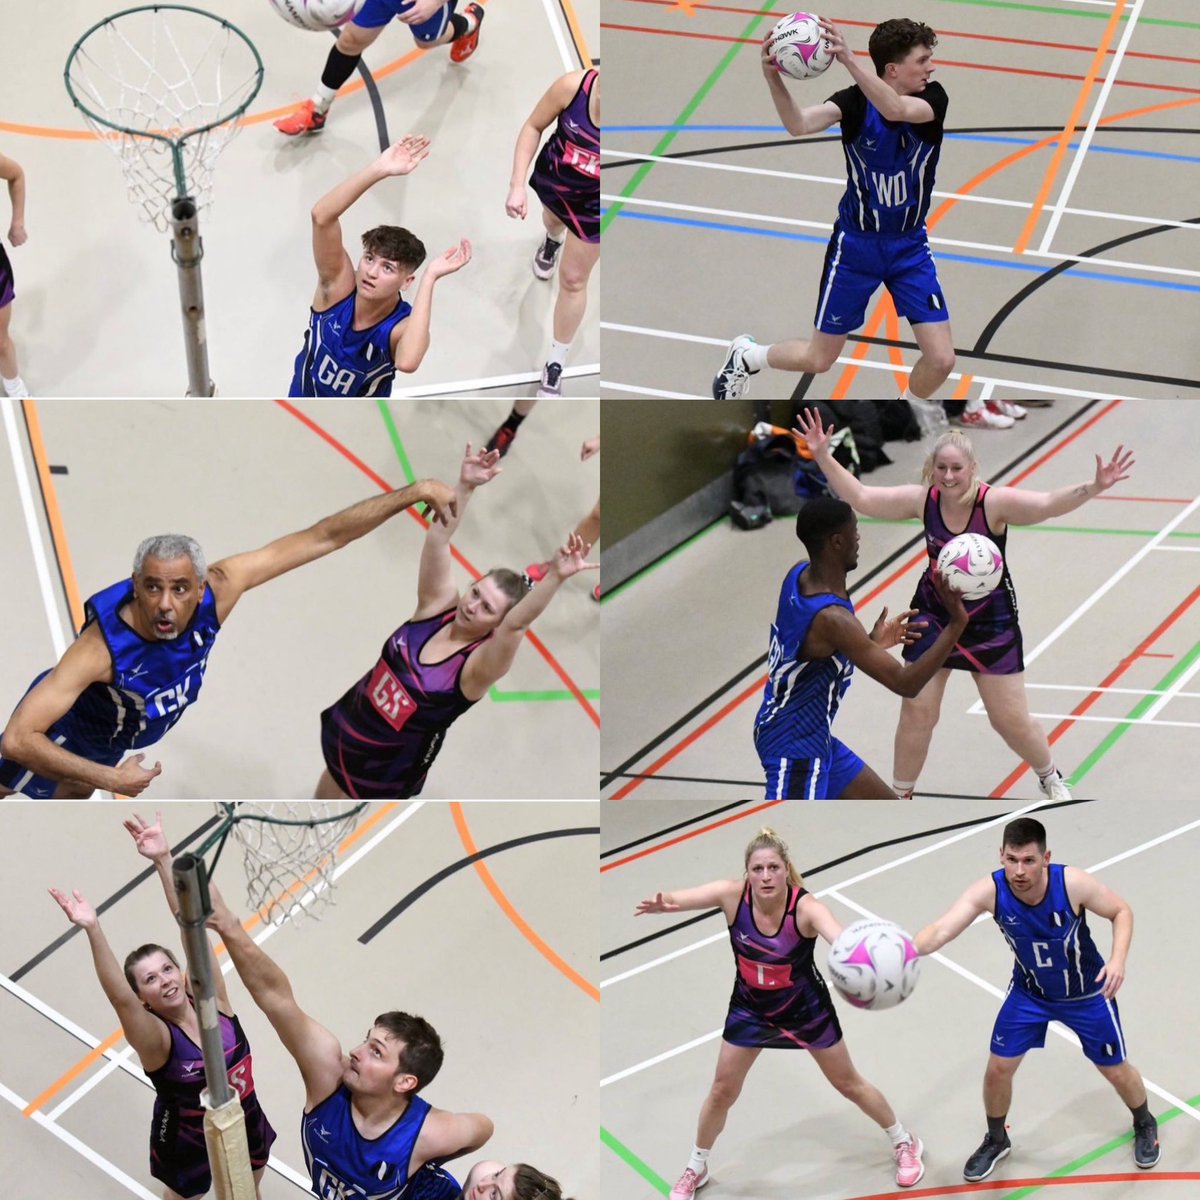 We got some new guys on court last week & ran new combos! 🗓The Roos first @EnglandMMNA National League fixture is Sat v @KnightsNetball @NorSchSport 13:30 FCP 🗓 Our next home match is 6 Apr v Henley Hawks @SportsparkUEA 12:30 FCP Interested in mens netball? DM us! 📸K Lake